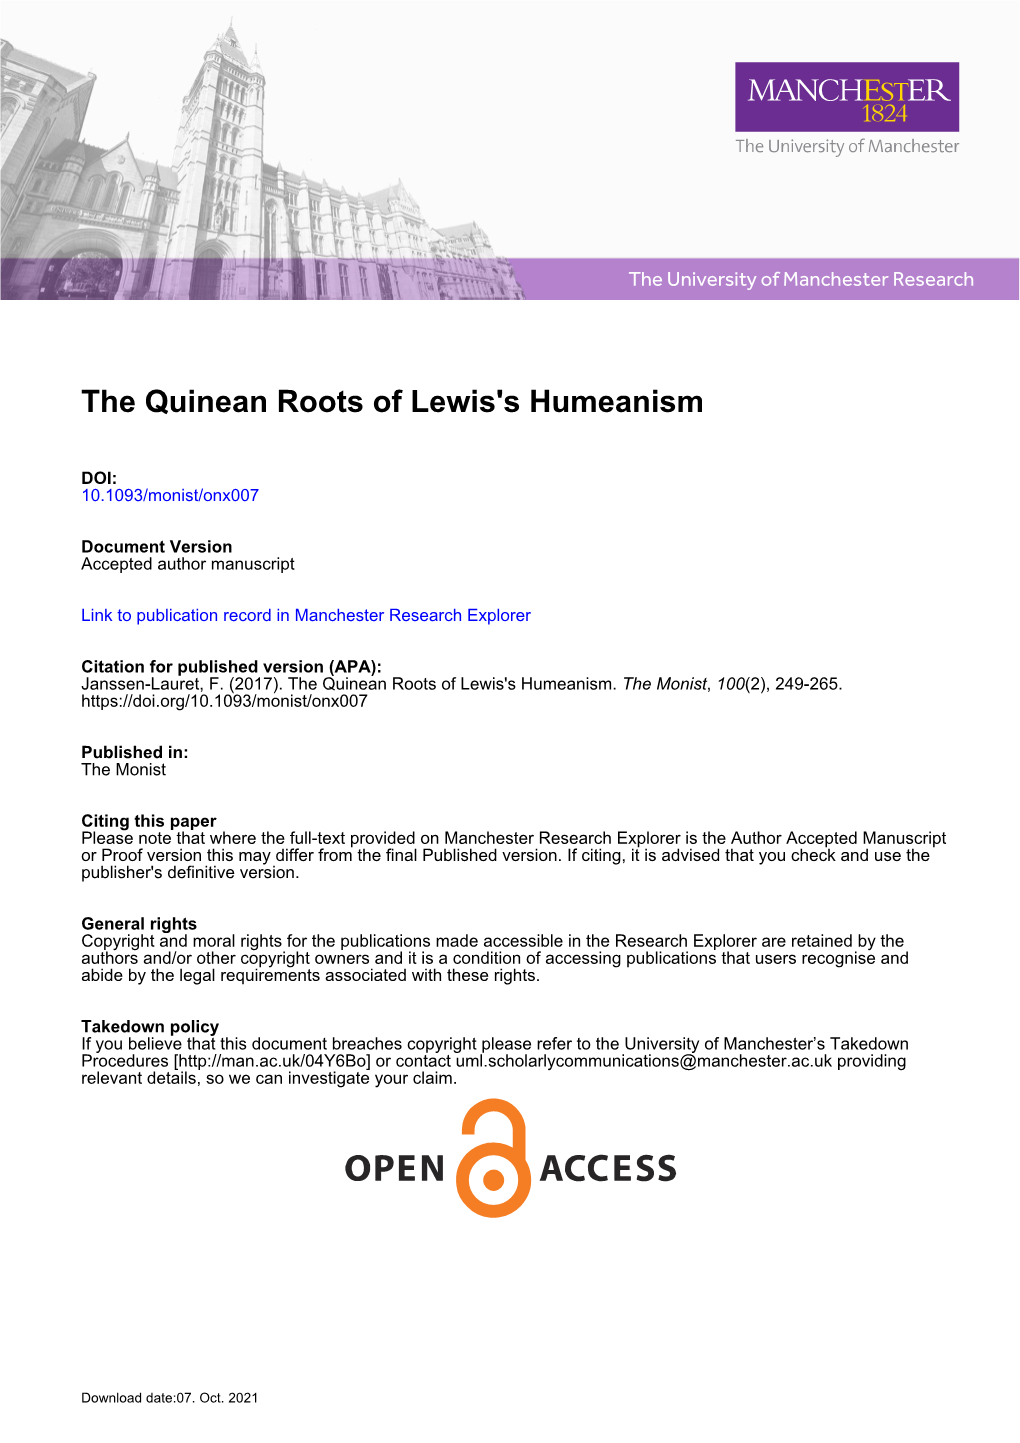 The Quinean Roots of Lewis's Humeanism